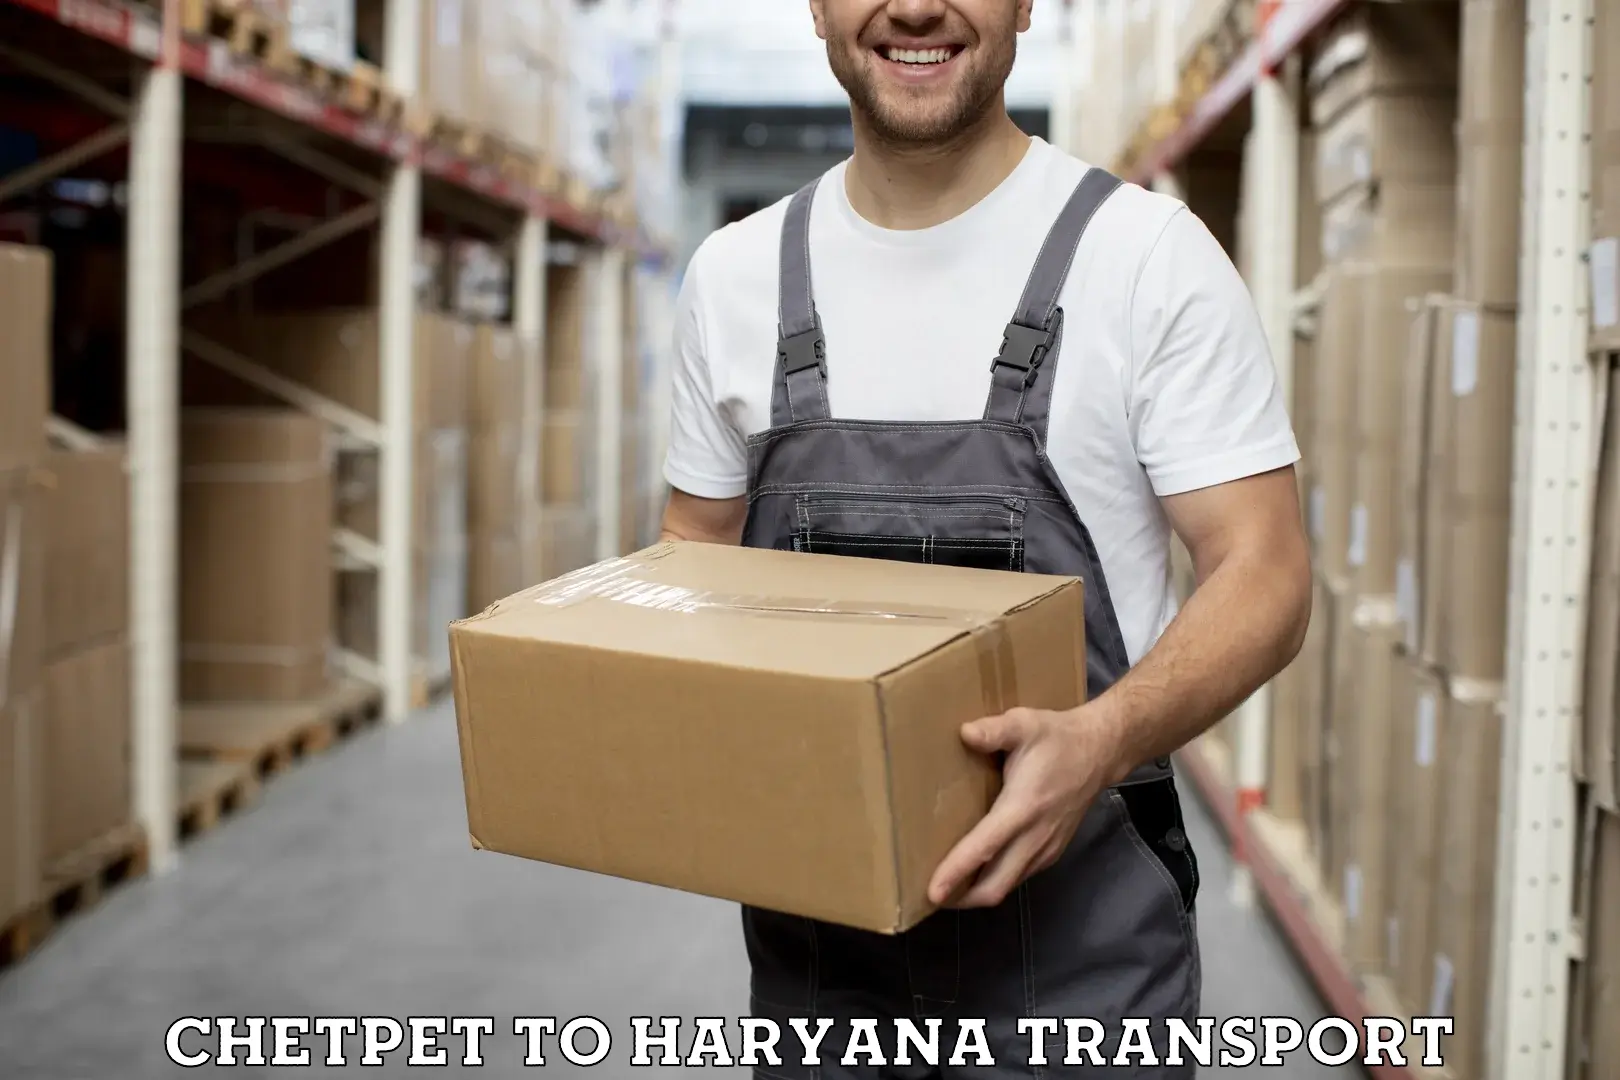 Two wheeler parcel service Chetpet to NCR Haryana